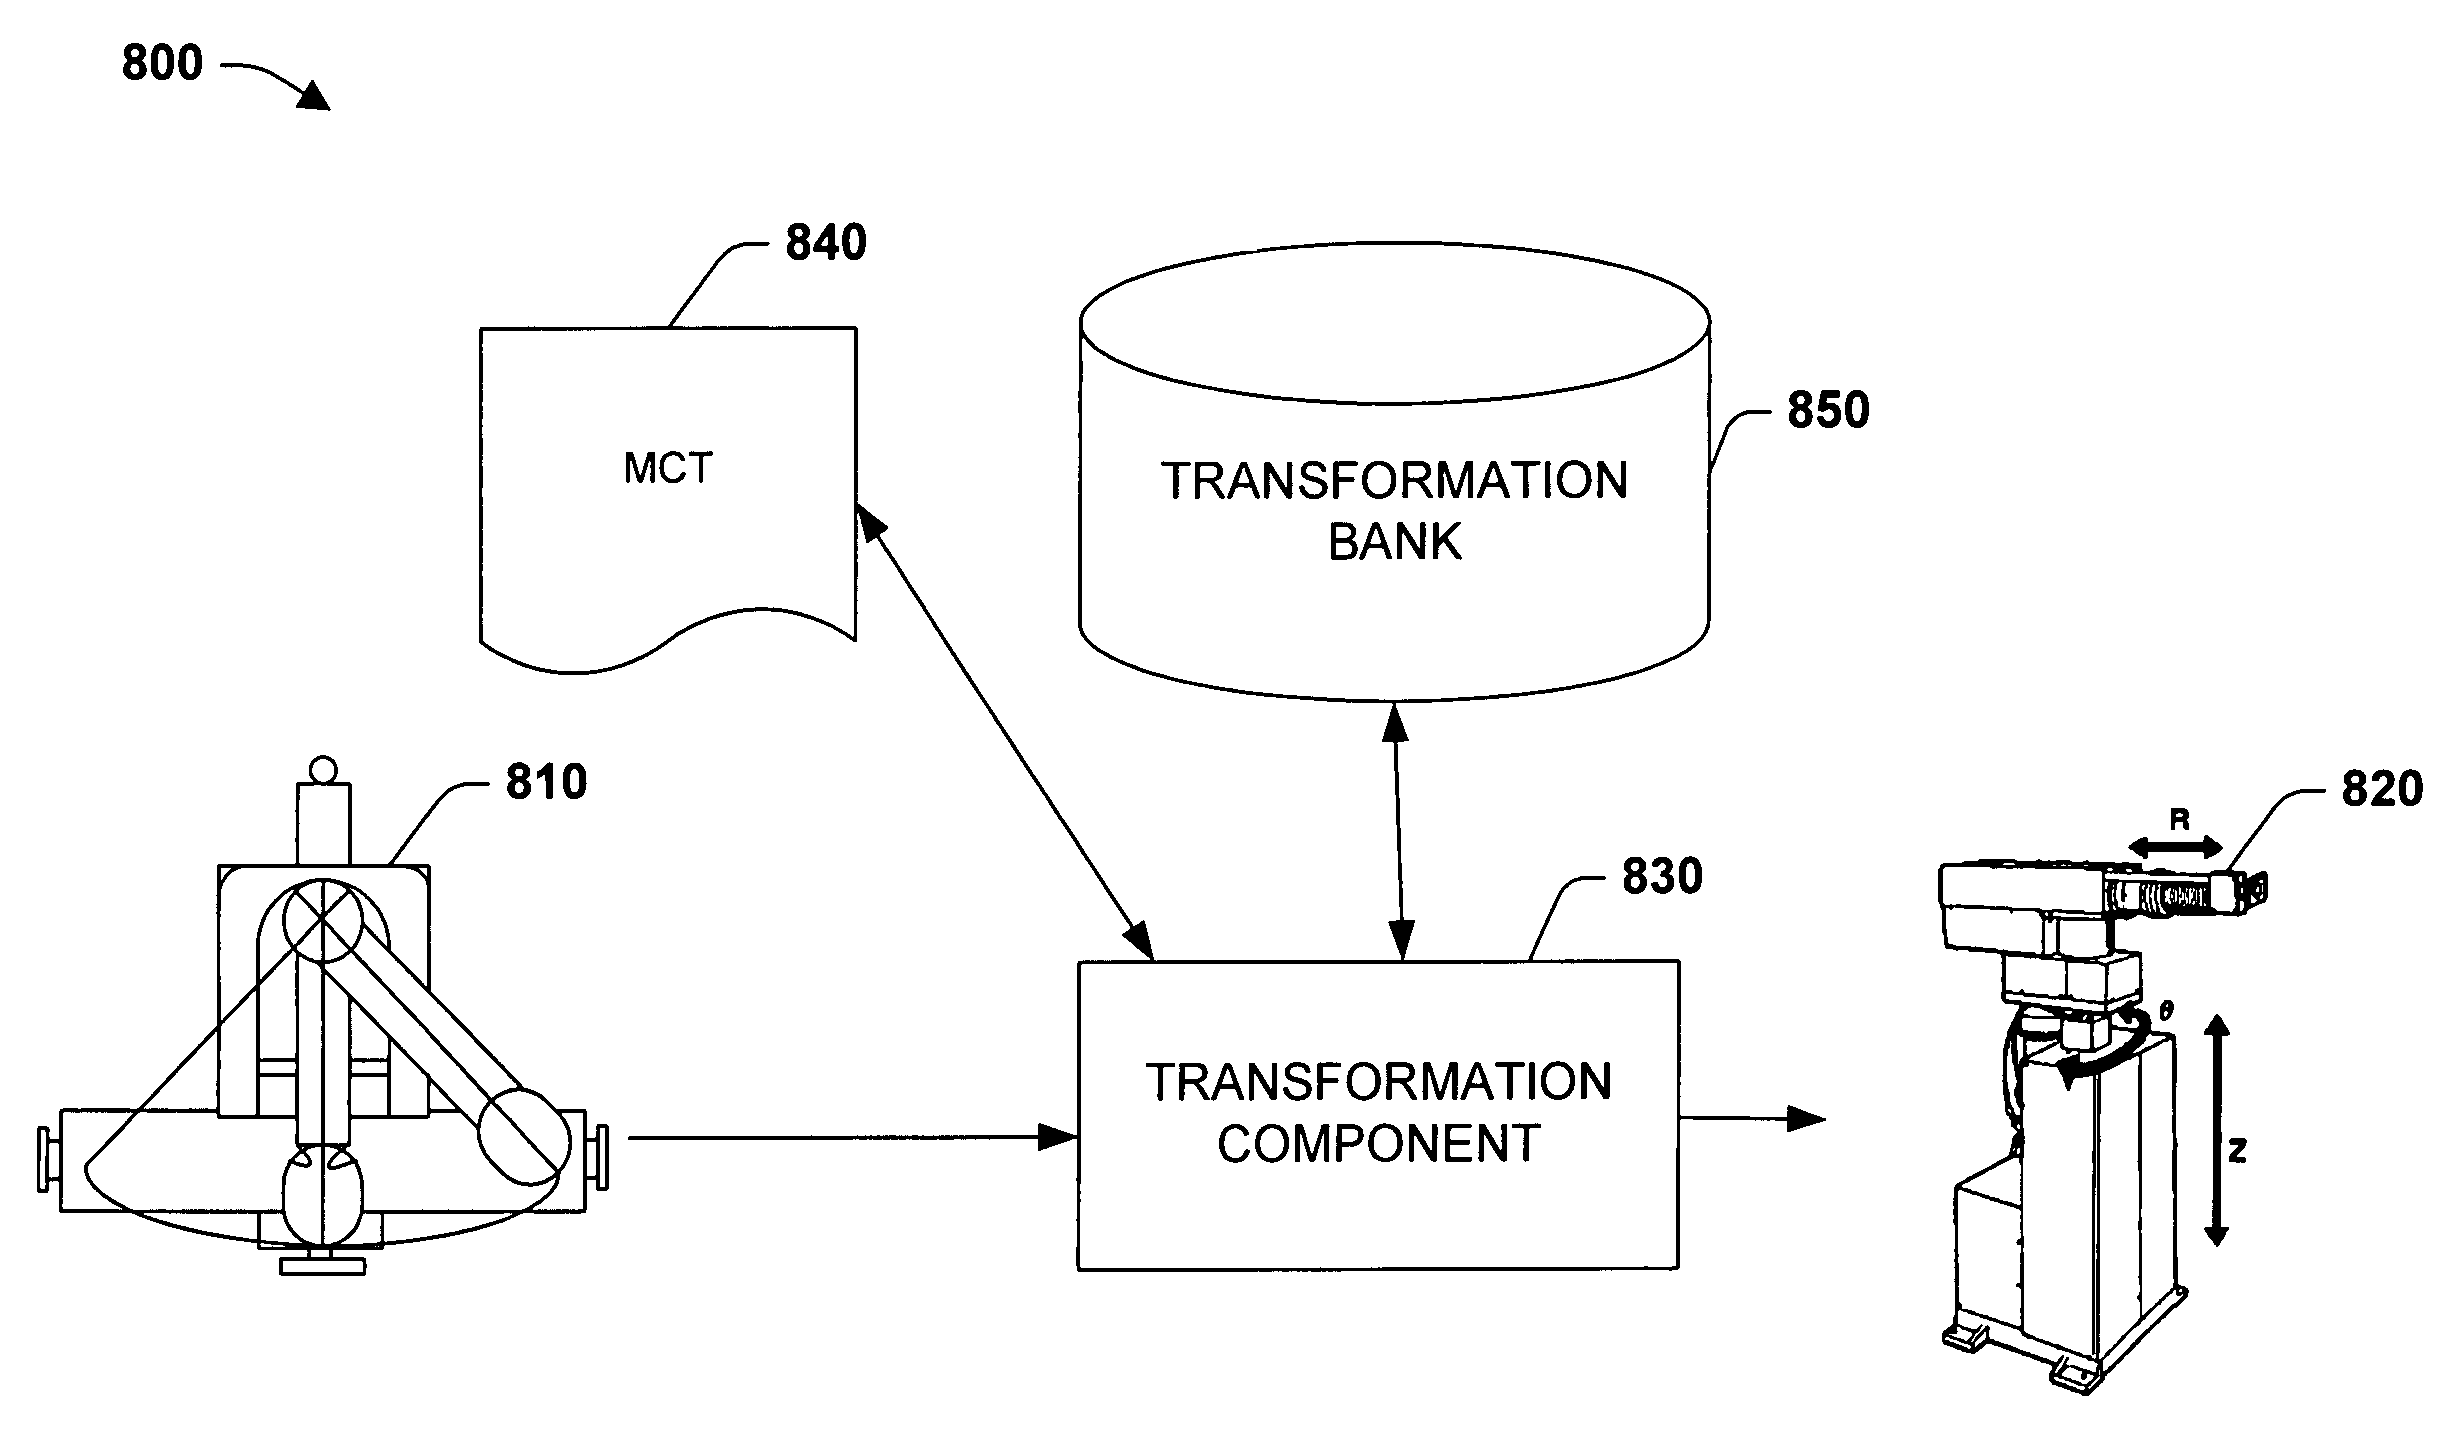 Systems and methods that facilitate motion control through coordinate system transformations